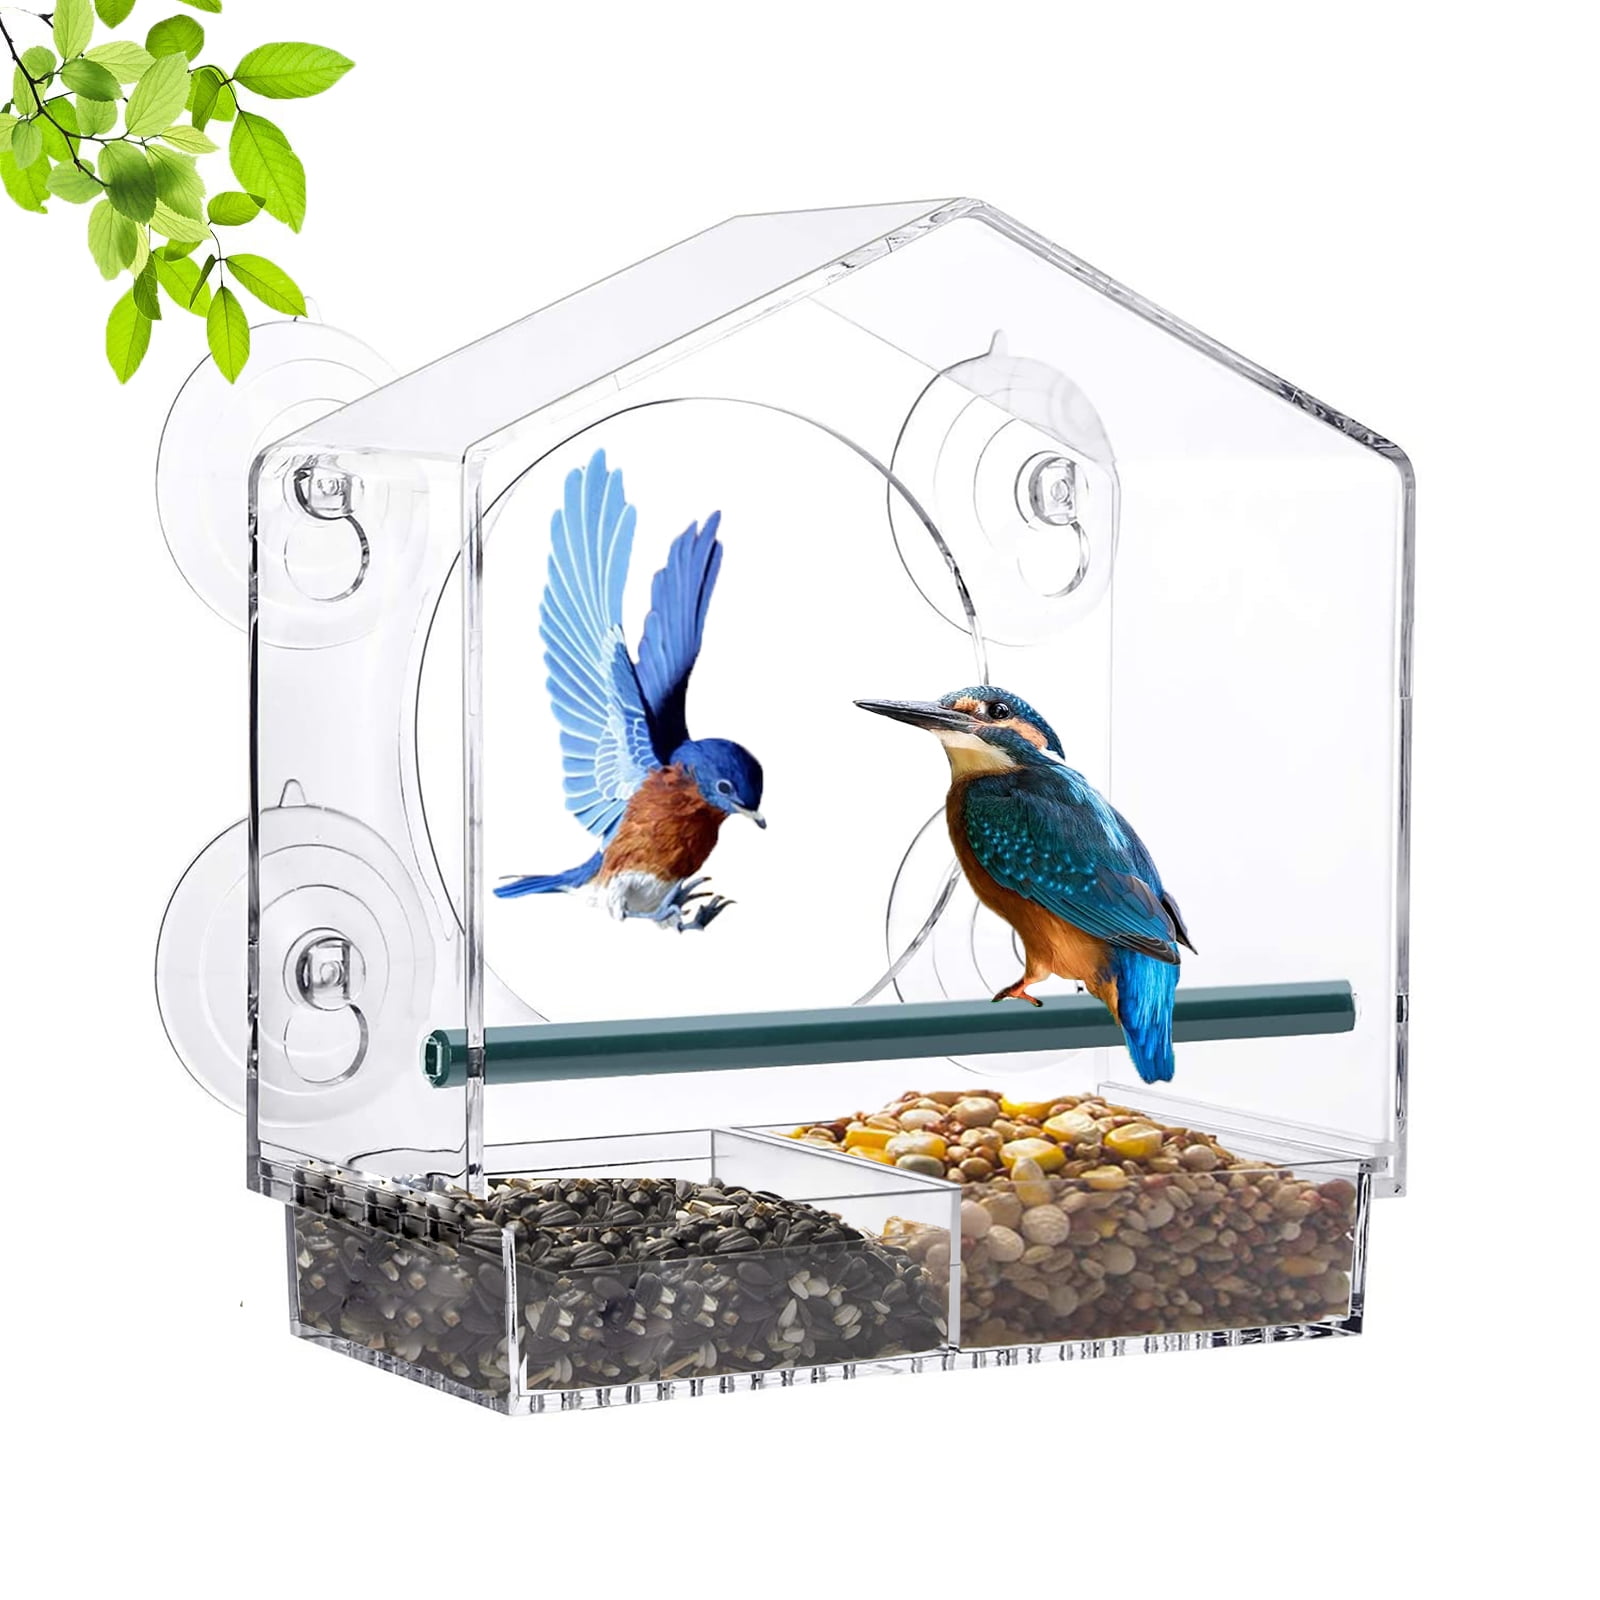 WLLKOO Window Bird Feeder, Bird House for Outside with 4 Rod, Acrylic  Window Bird Feeder with Strong Suction Cups and Drain Holes